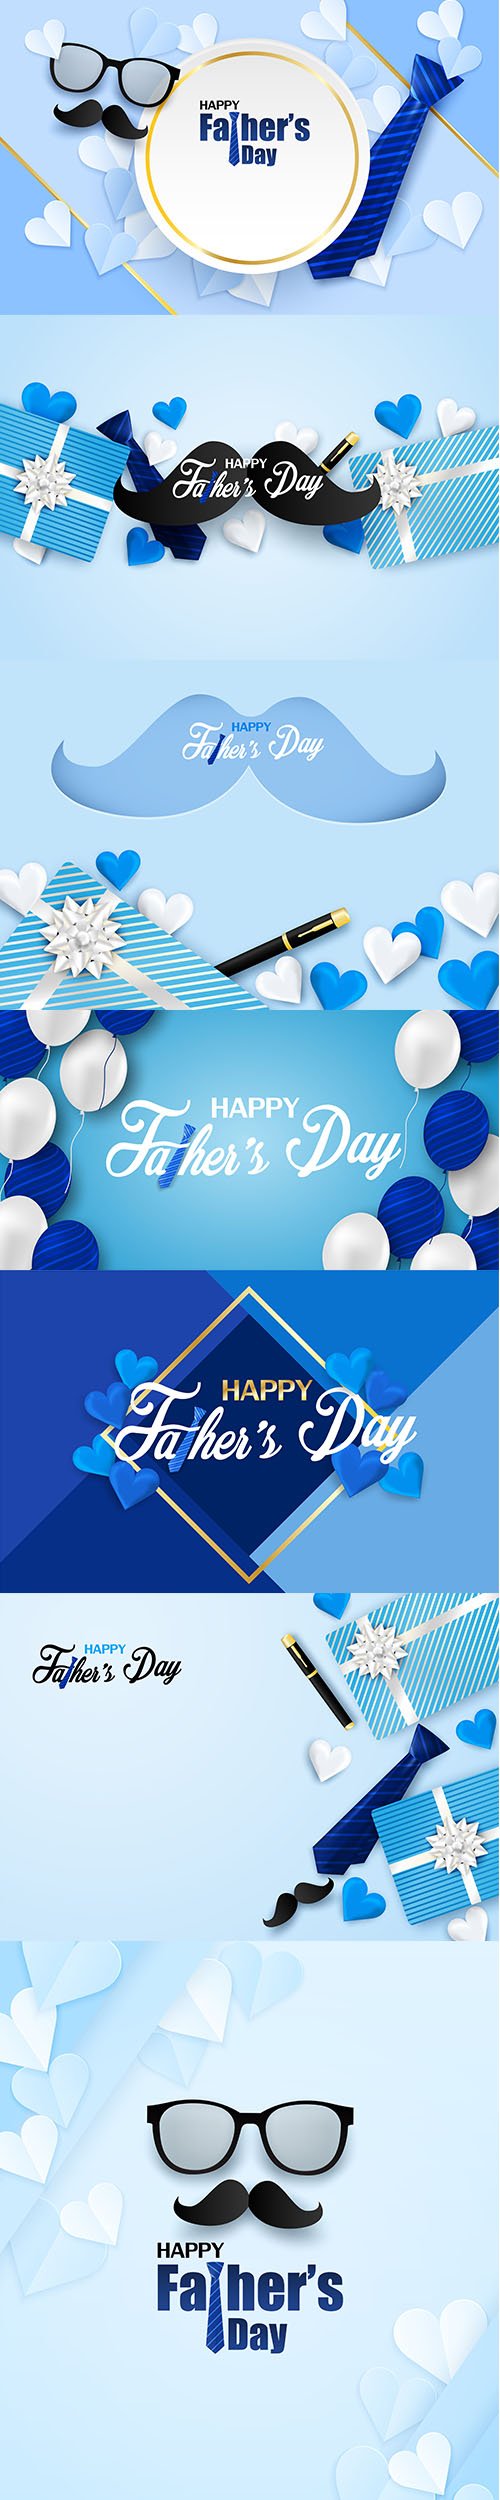 Backgrounds - Happy Fathers Day